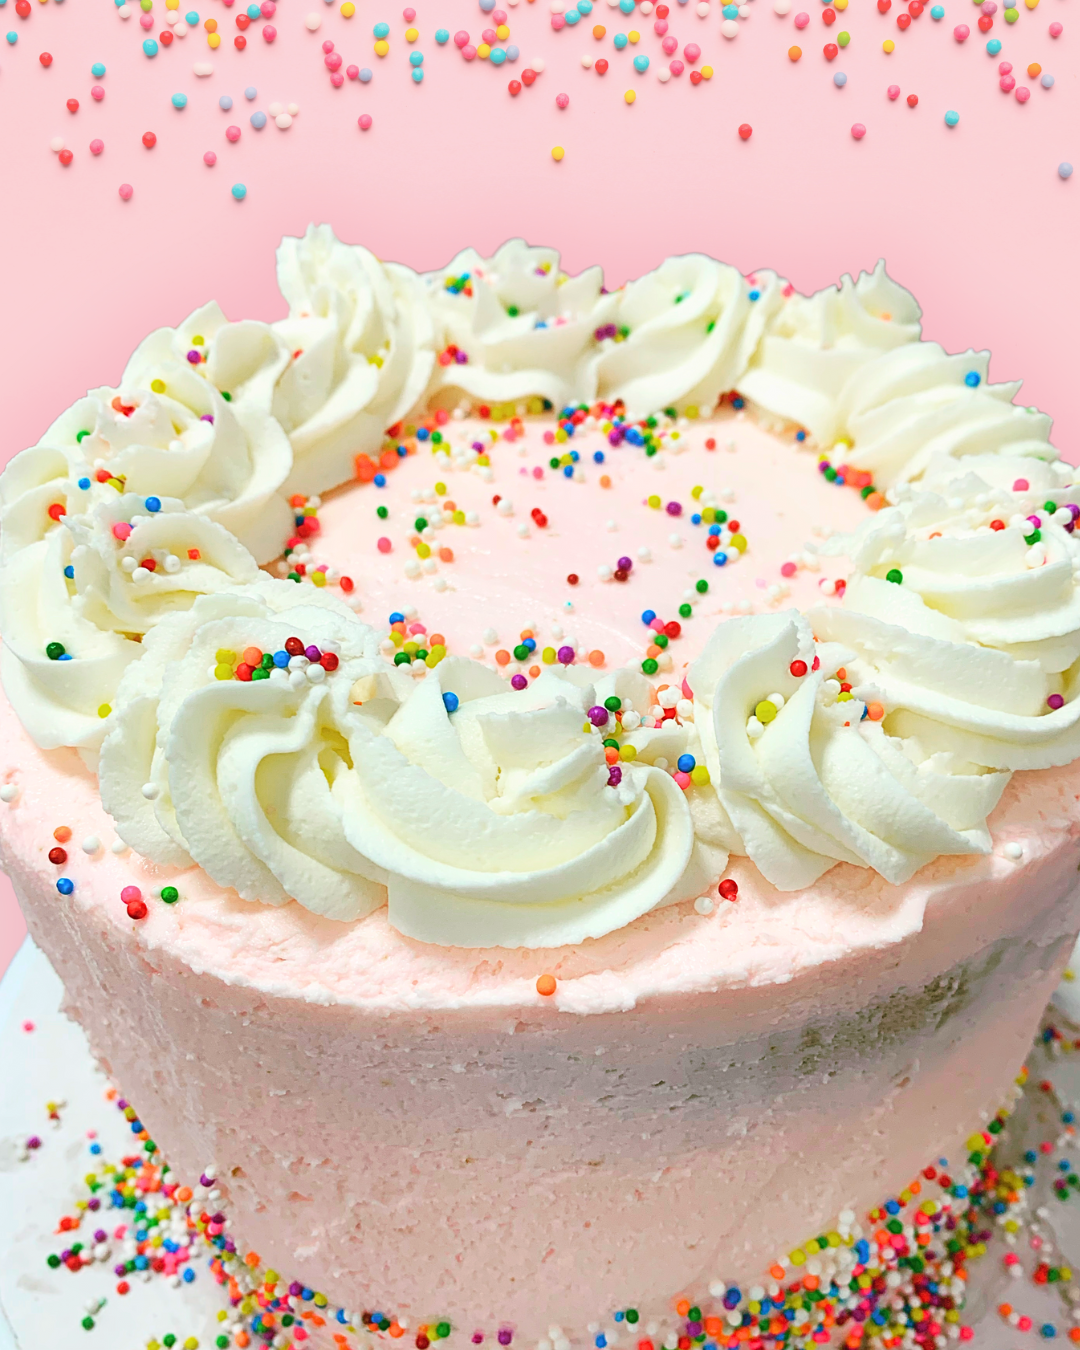 Pink and white birthday cake with sprinkles